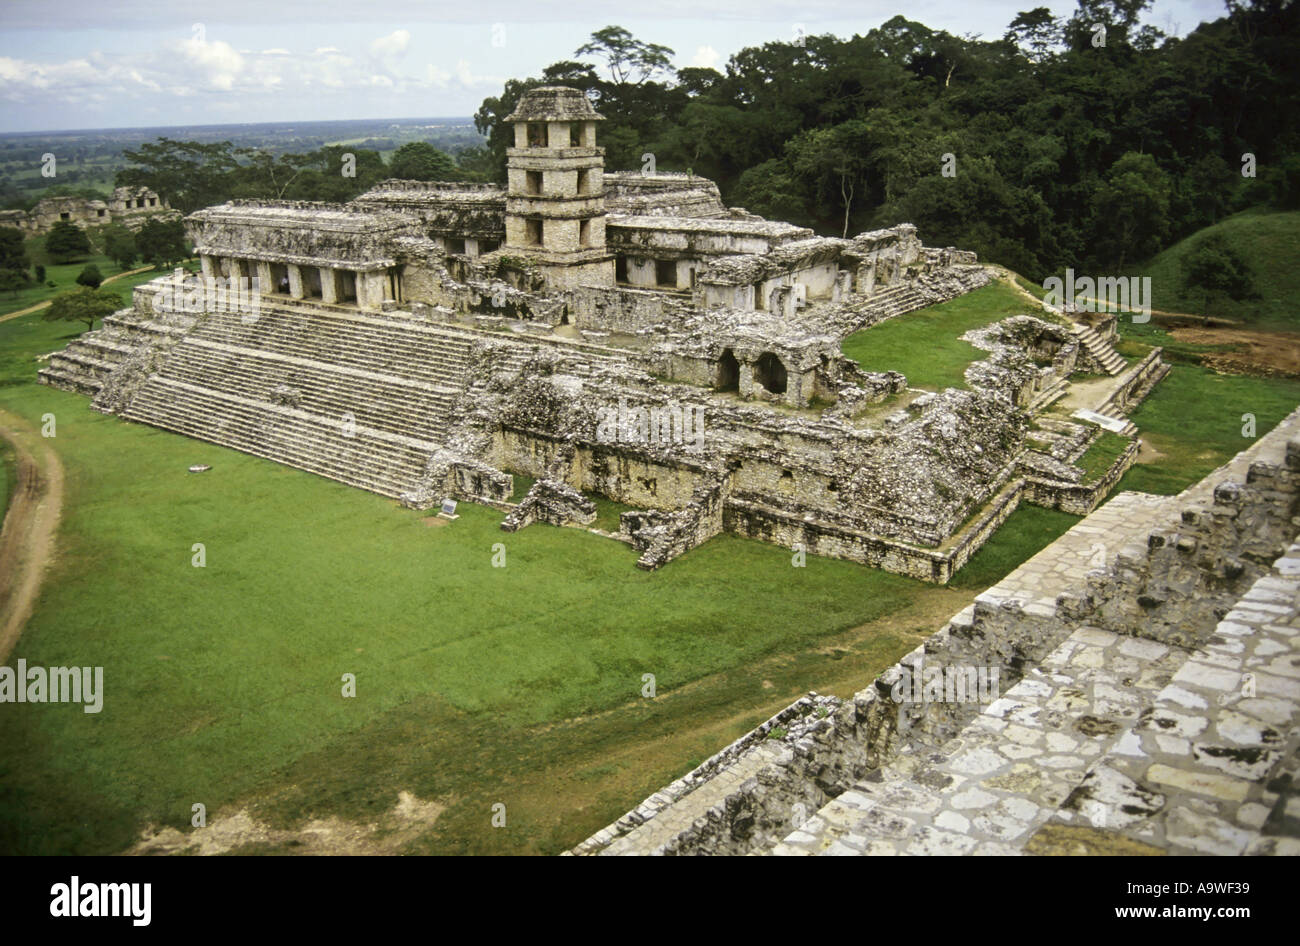 Palenque - The Palace From The Temple Of Inscriptions, Chiapas State, Mexico Stock Photo